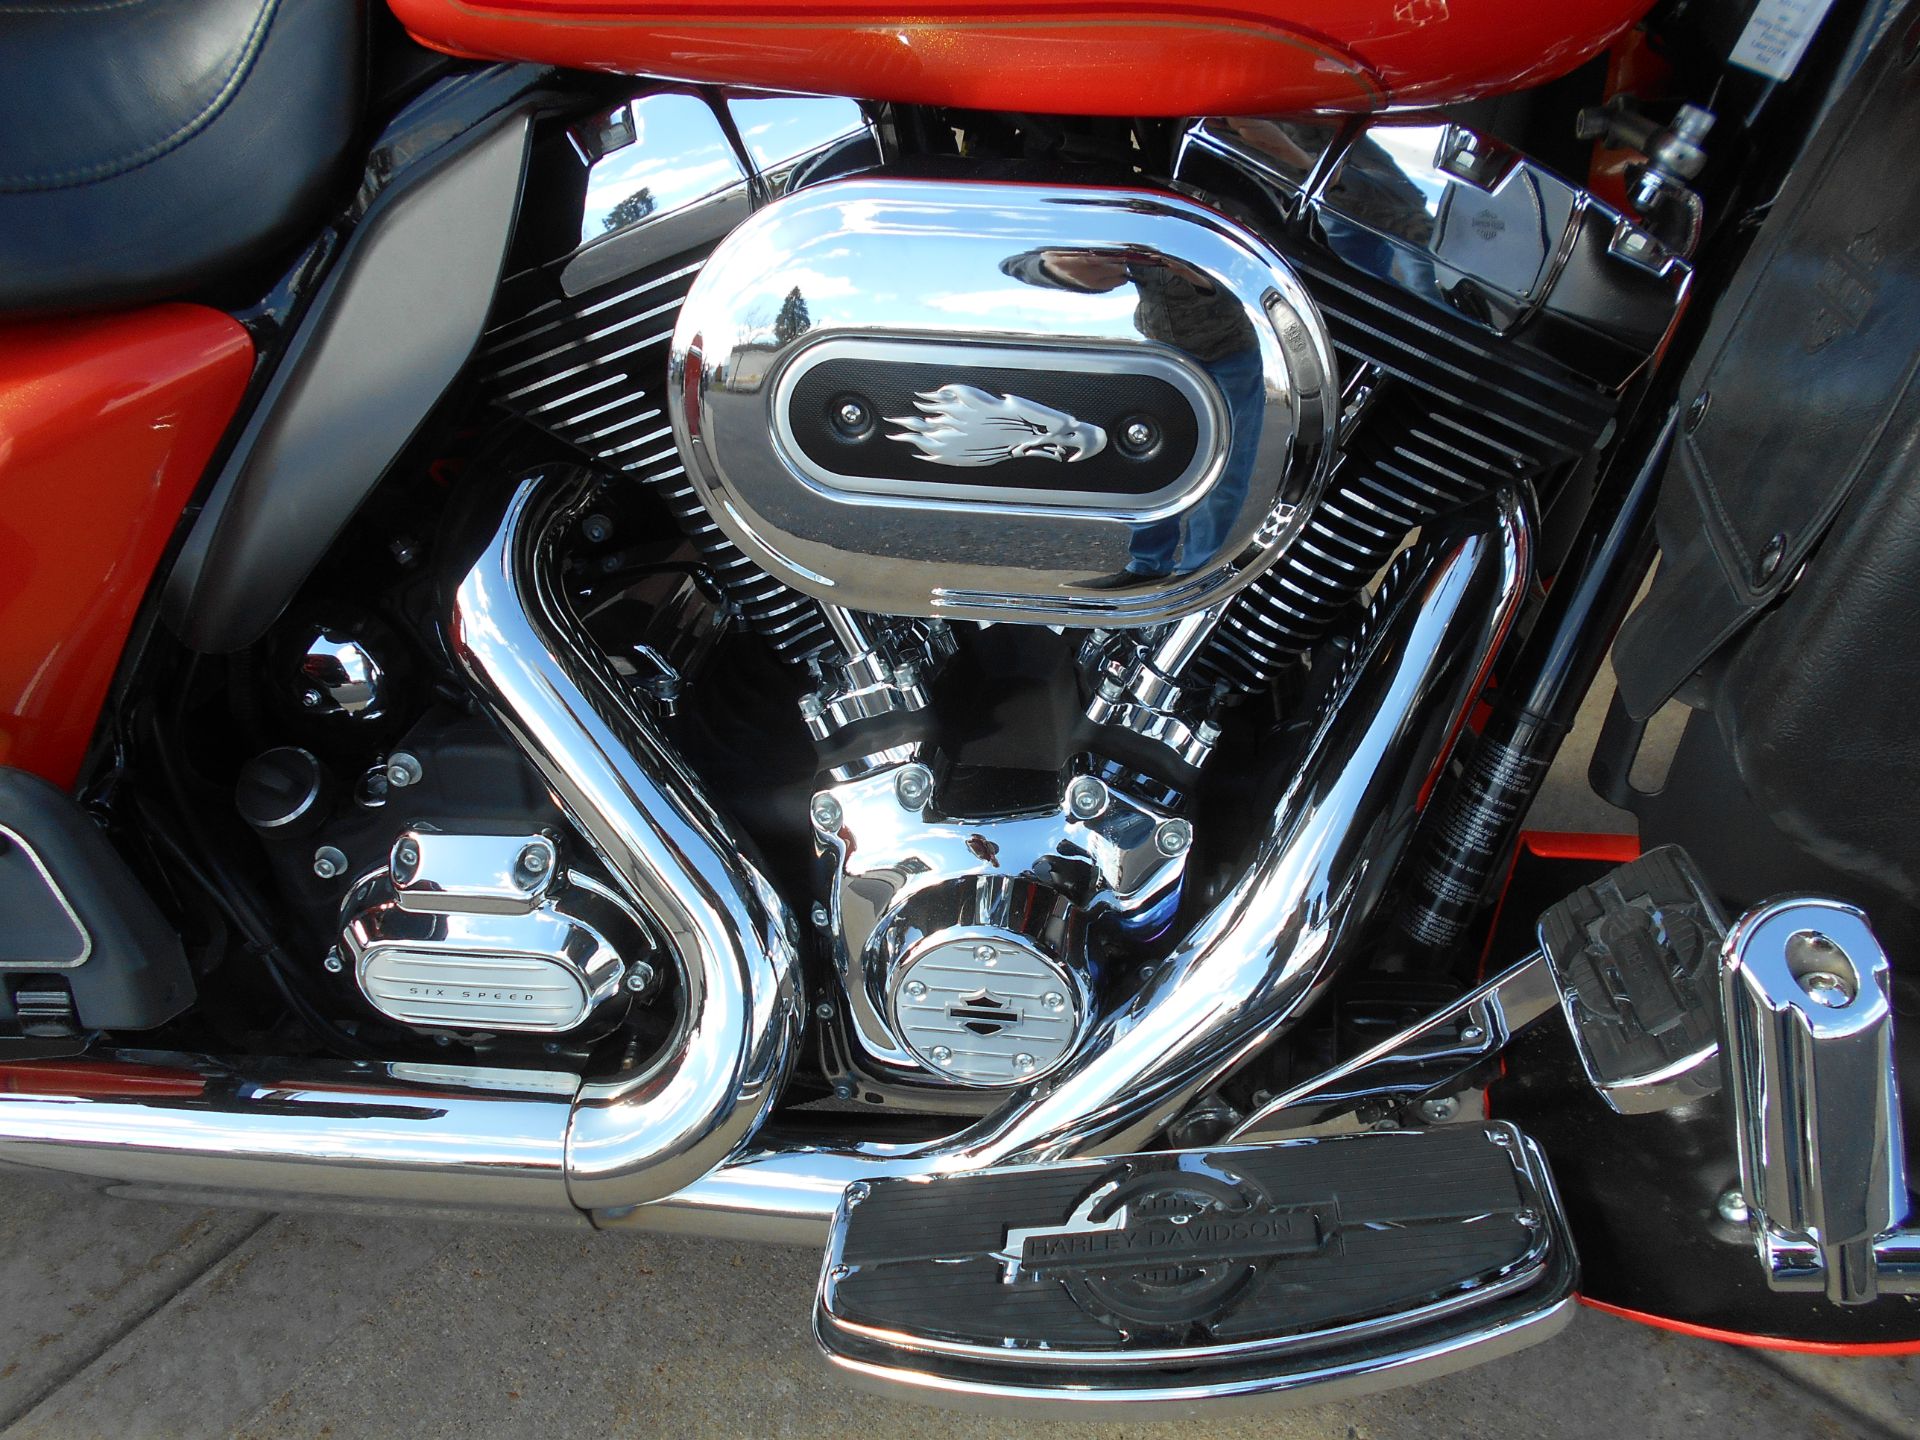 2012 Harley-Davidson Ultra Classic® Electra Glide® in Mauston, Wisconsin - Photo 5